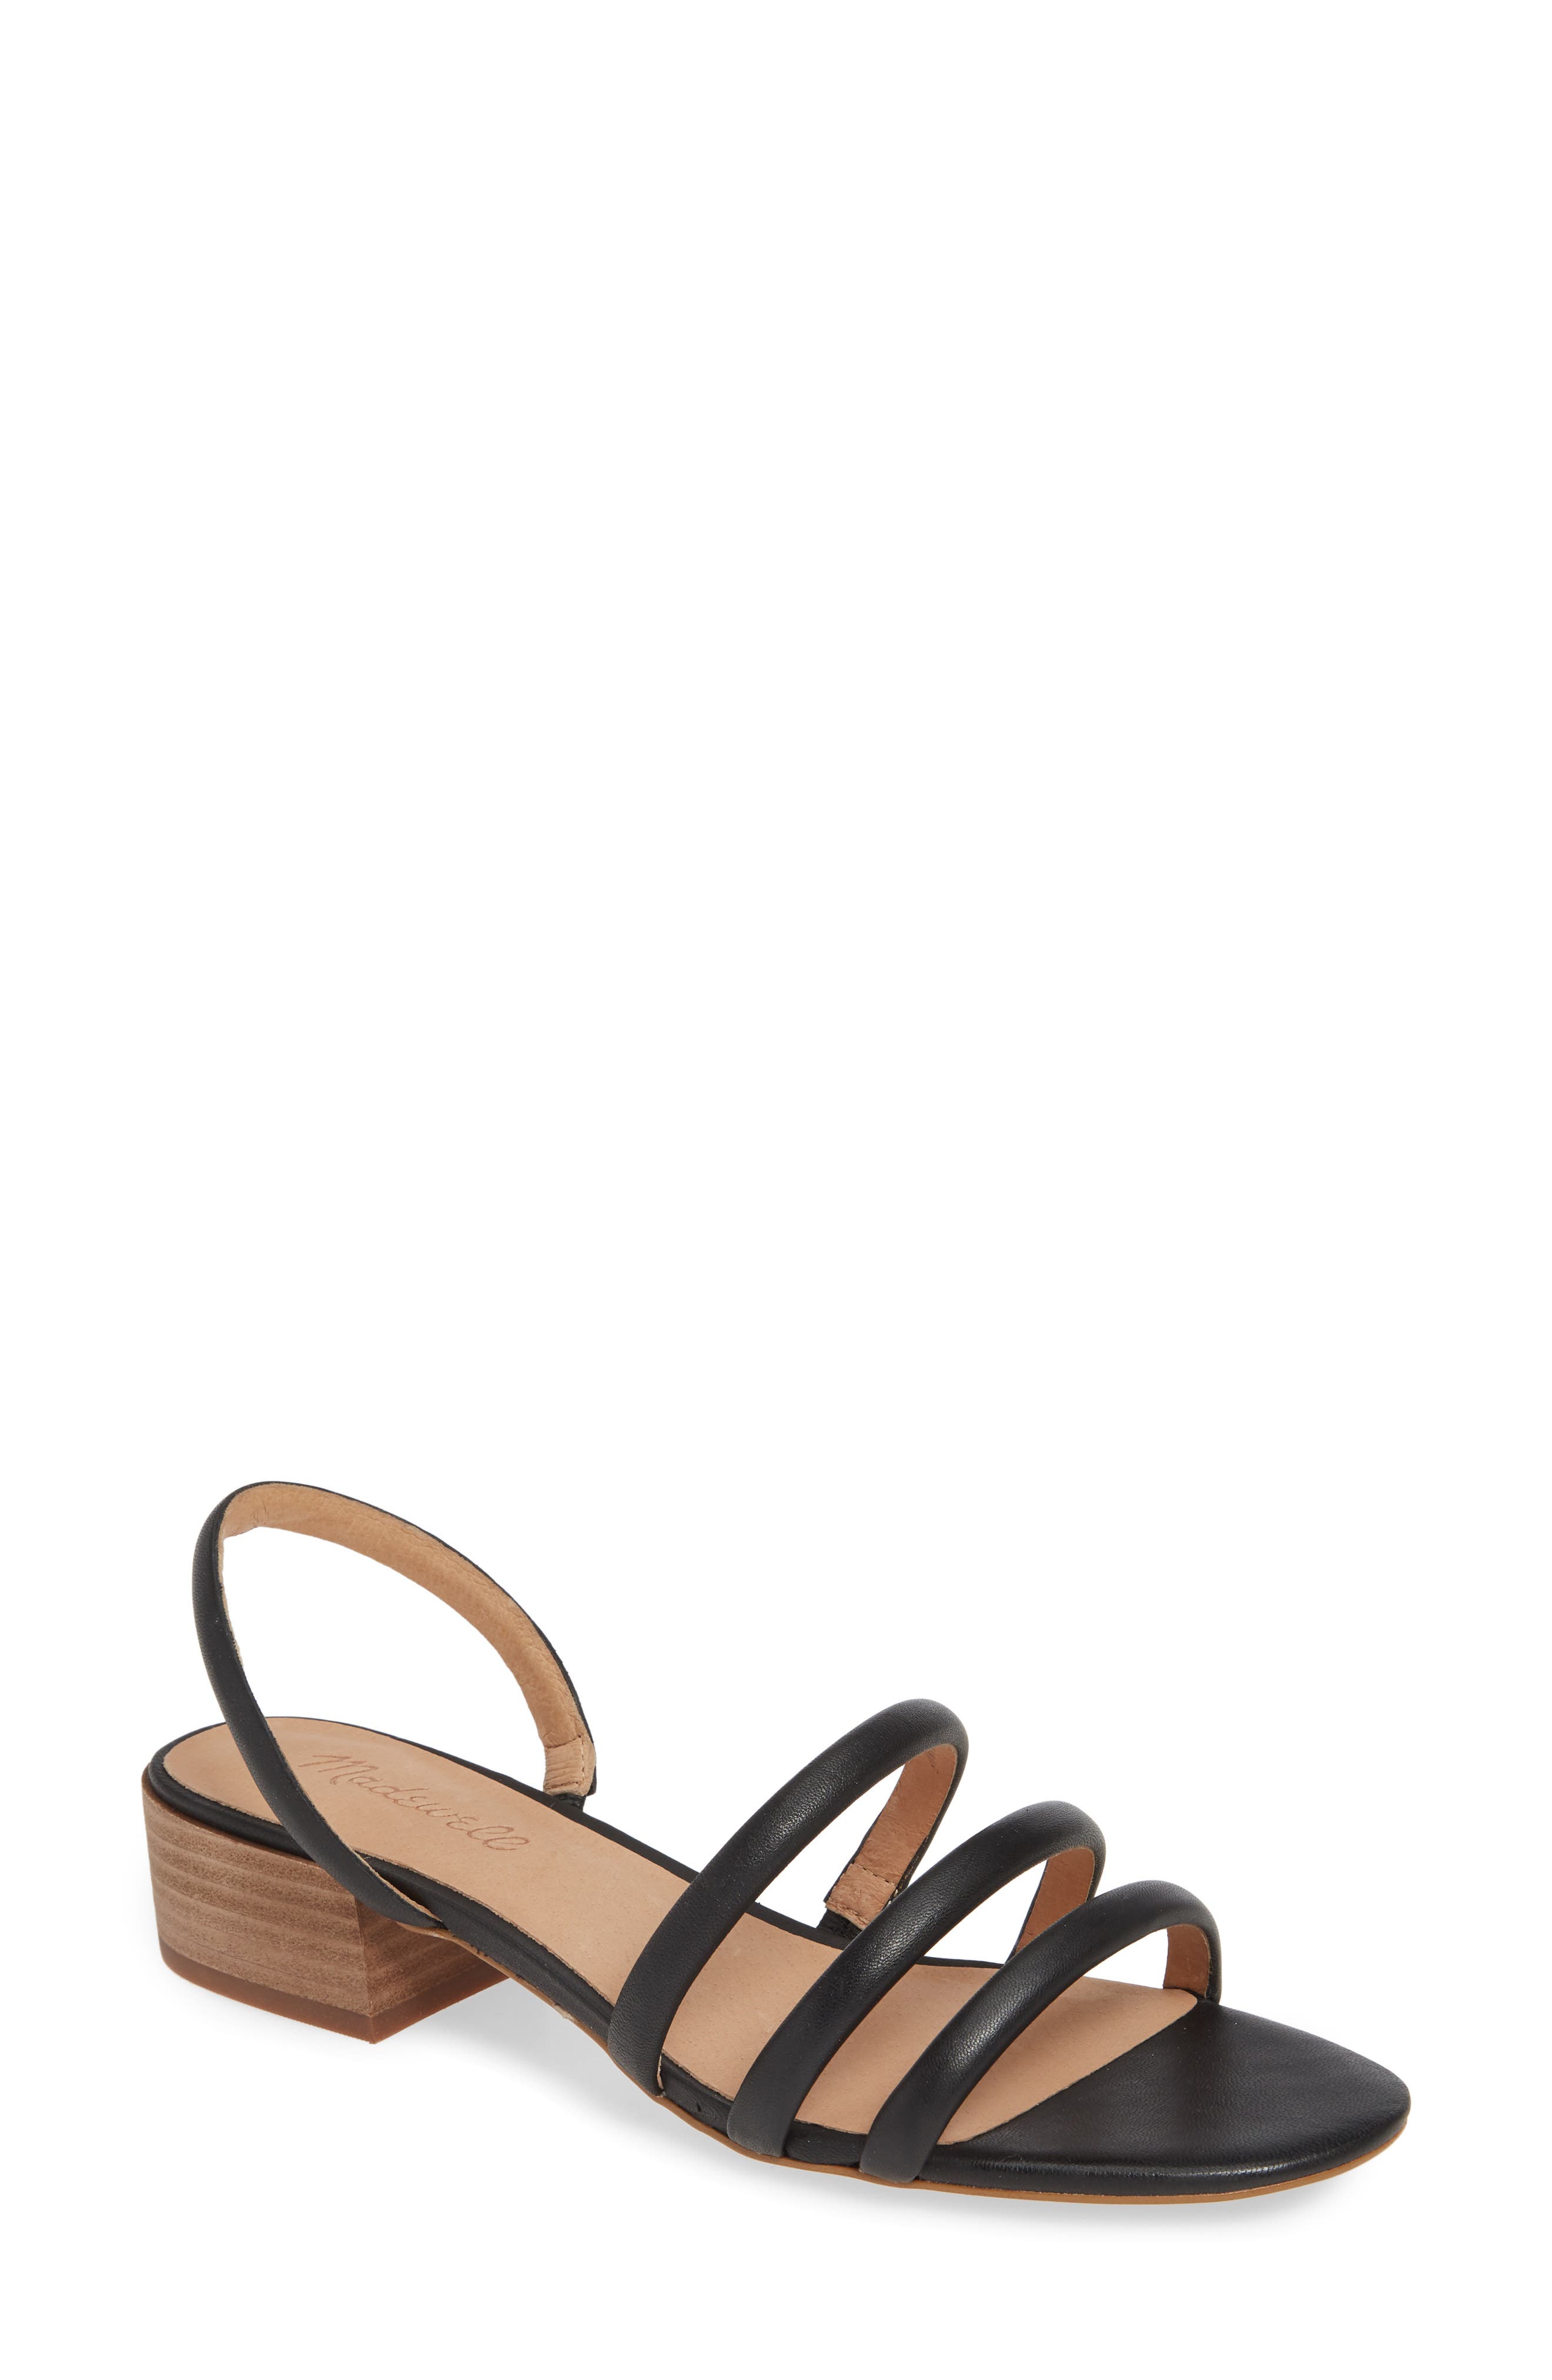 Madewell Addie Strappy Leather Sandal 